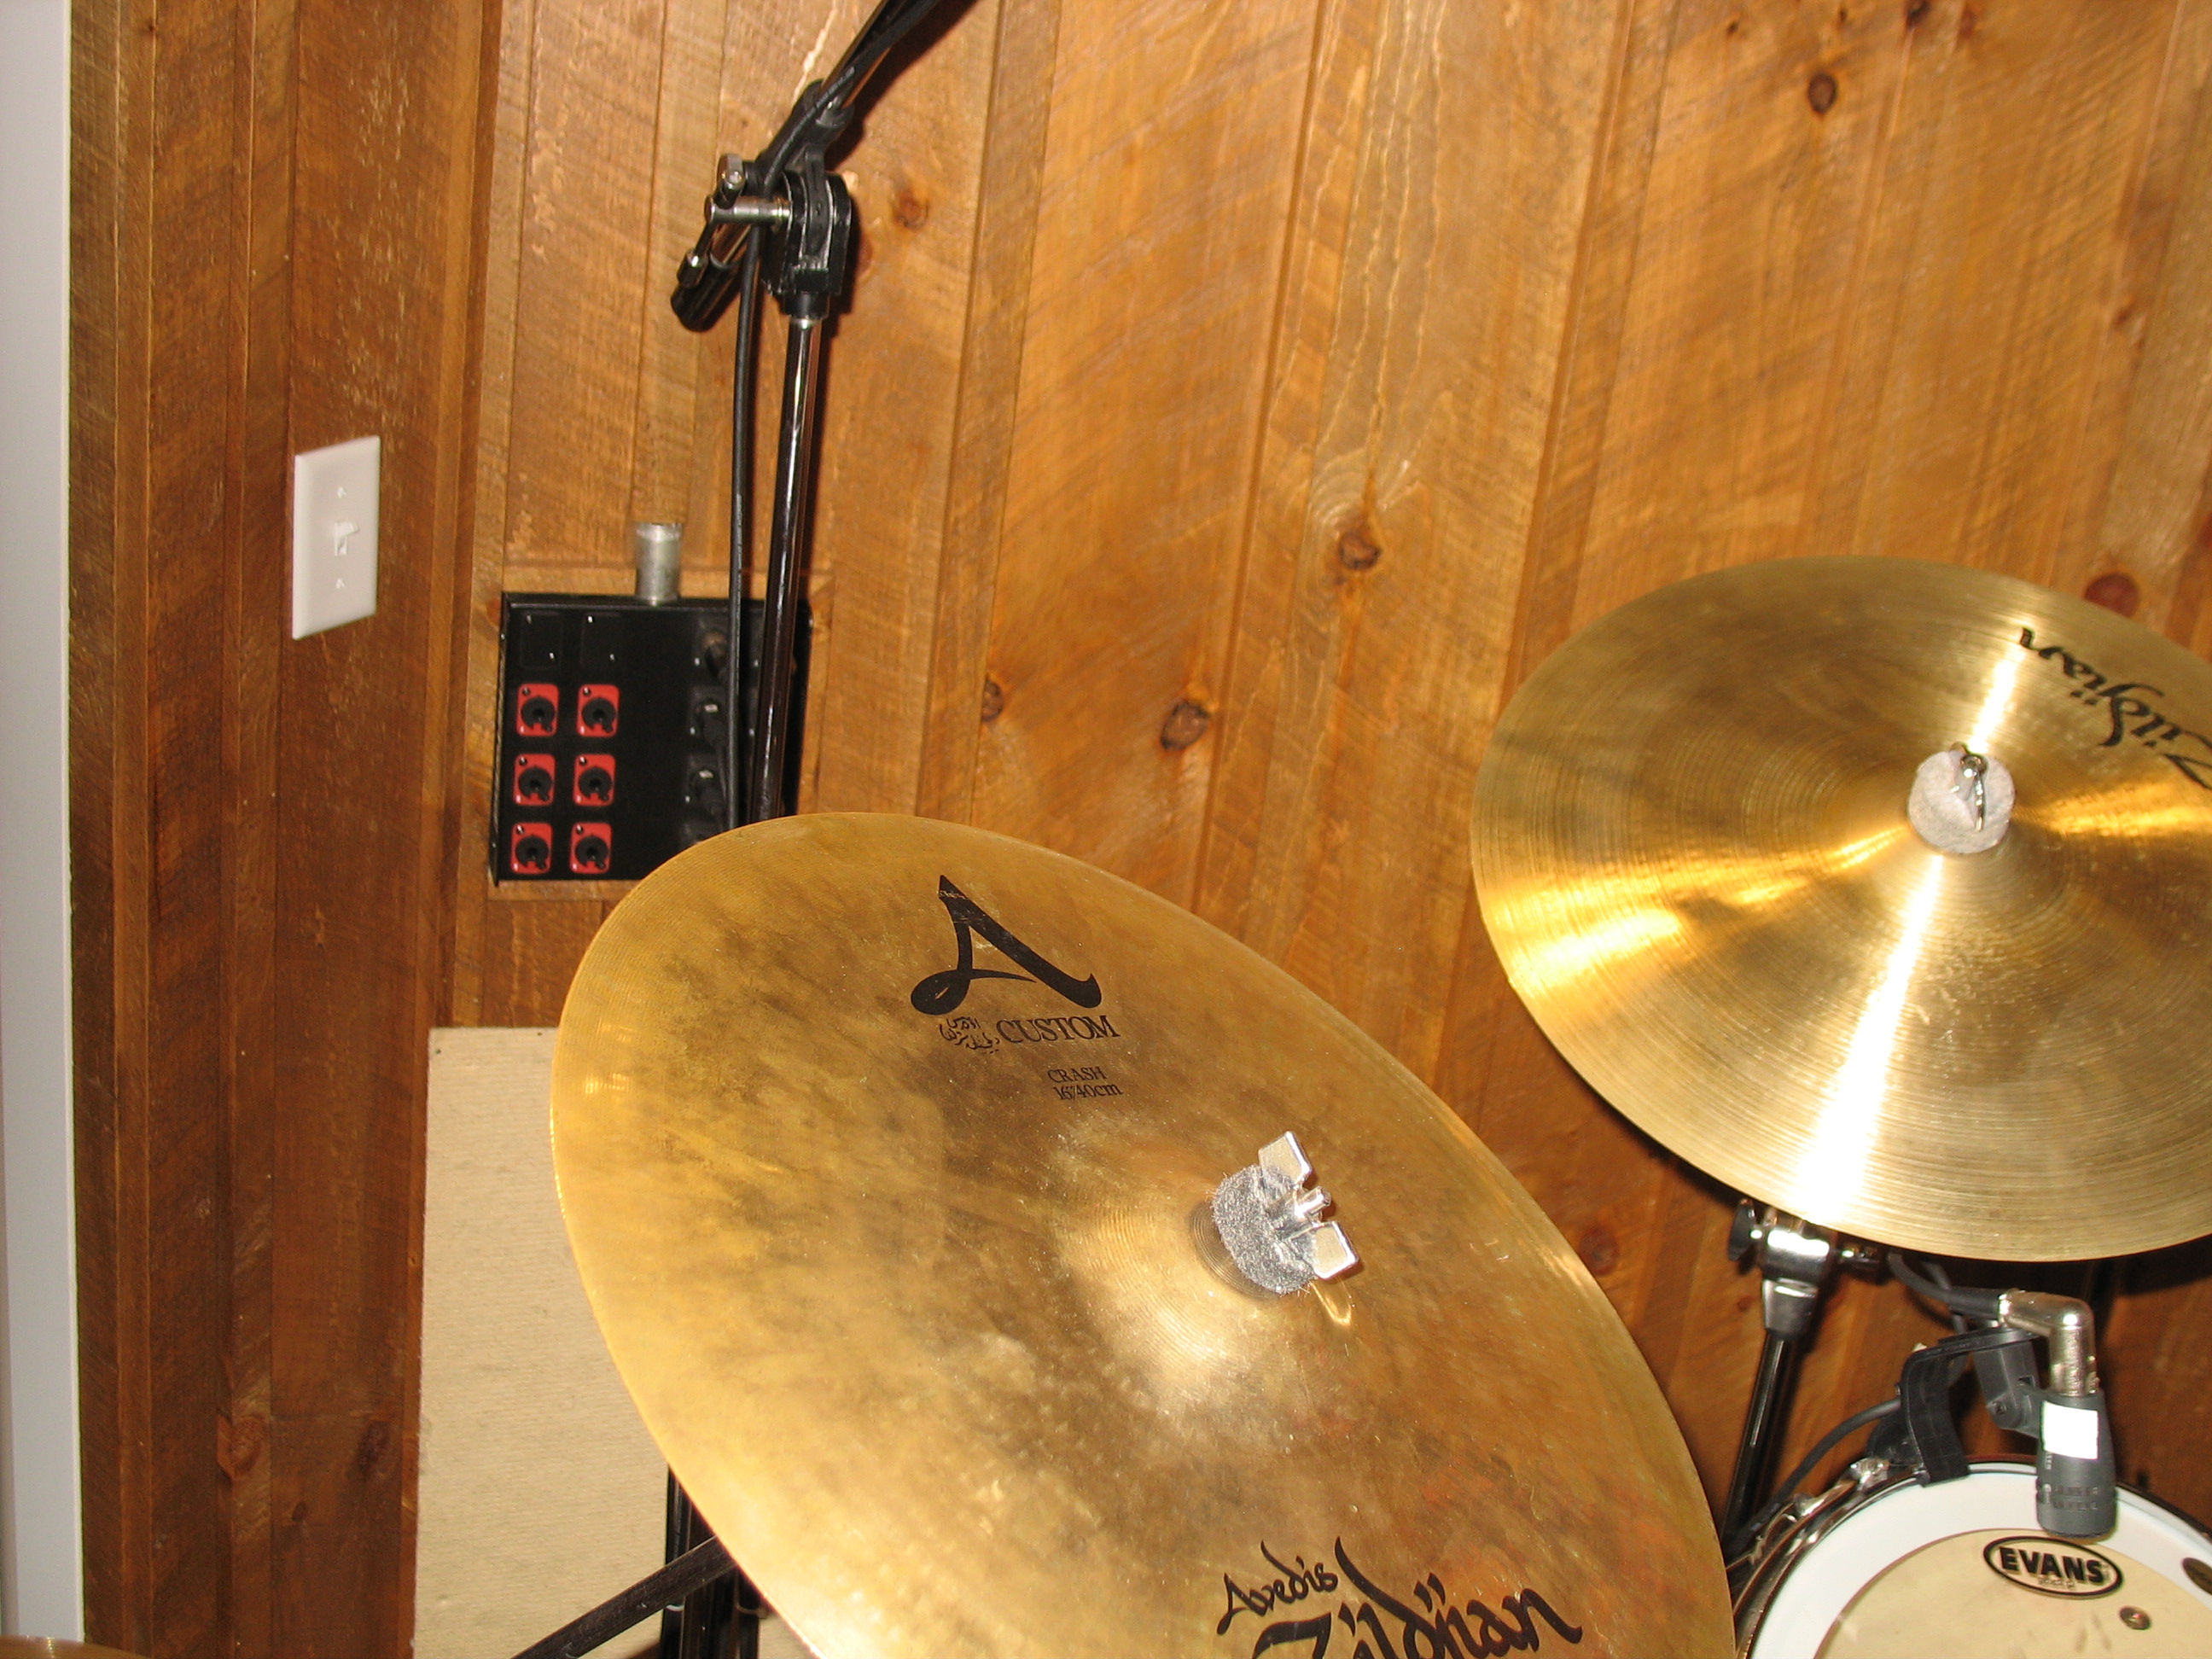 Cymbals in the drum room